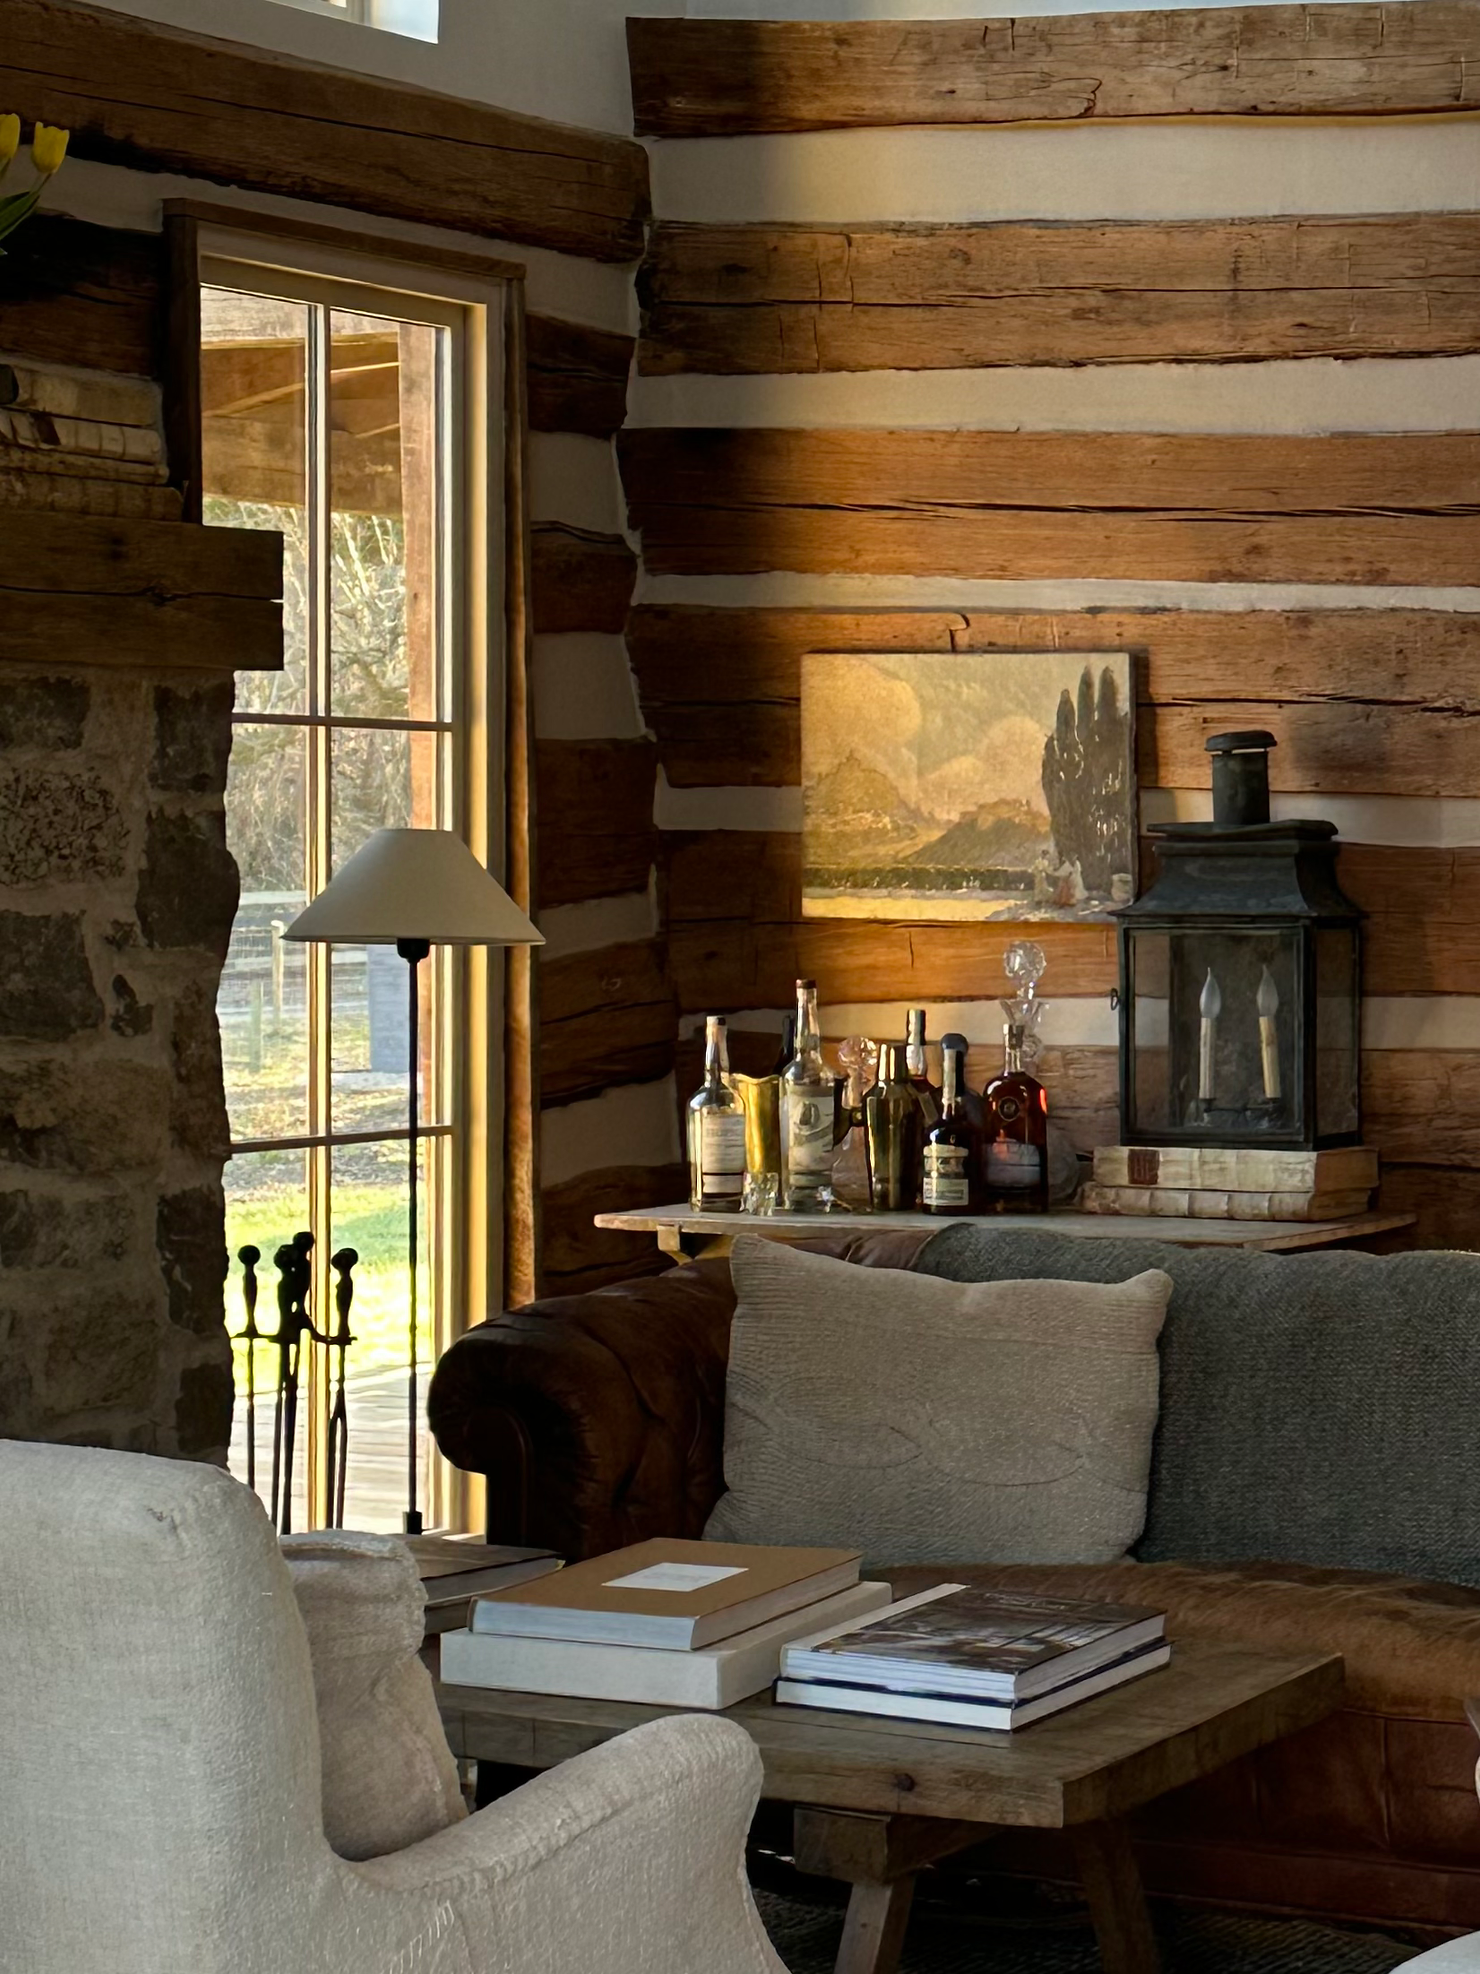 Rustic cabin living room with log walls and chinking. Home by Velvet and Linen